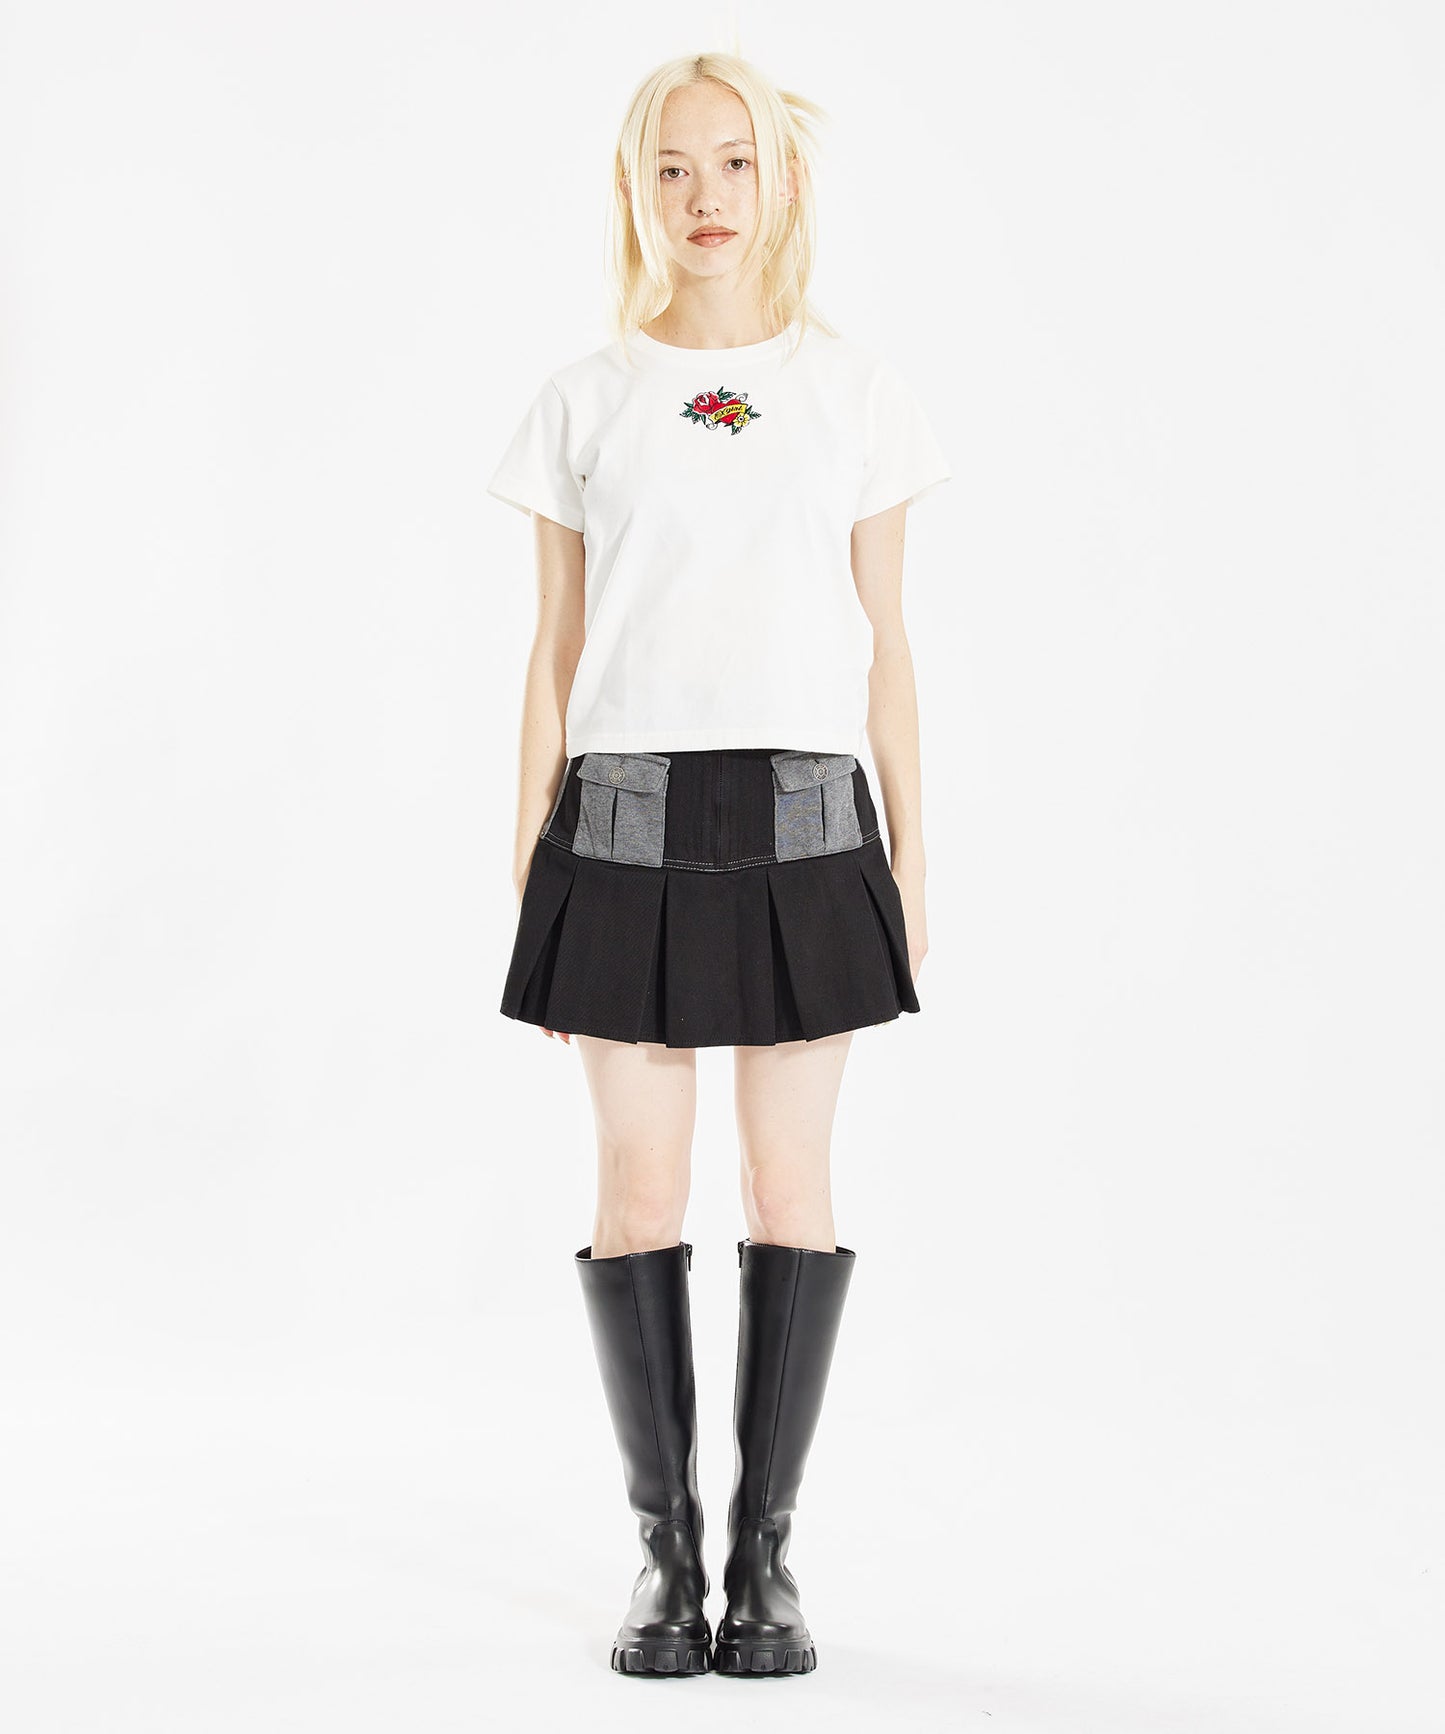 ROSE HEART EMBROIDERY S/S BABY TEE